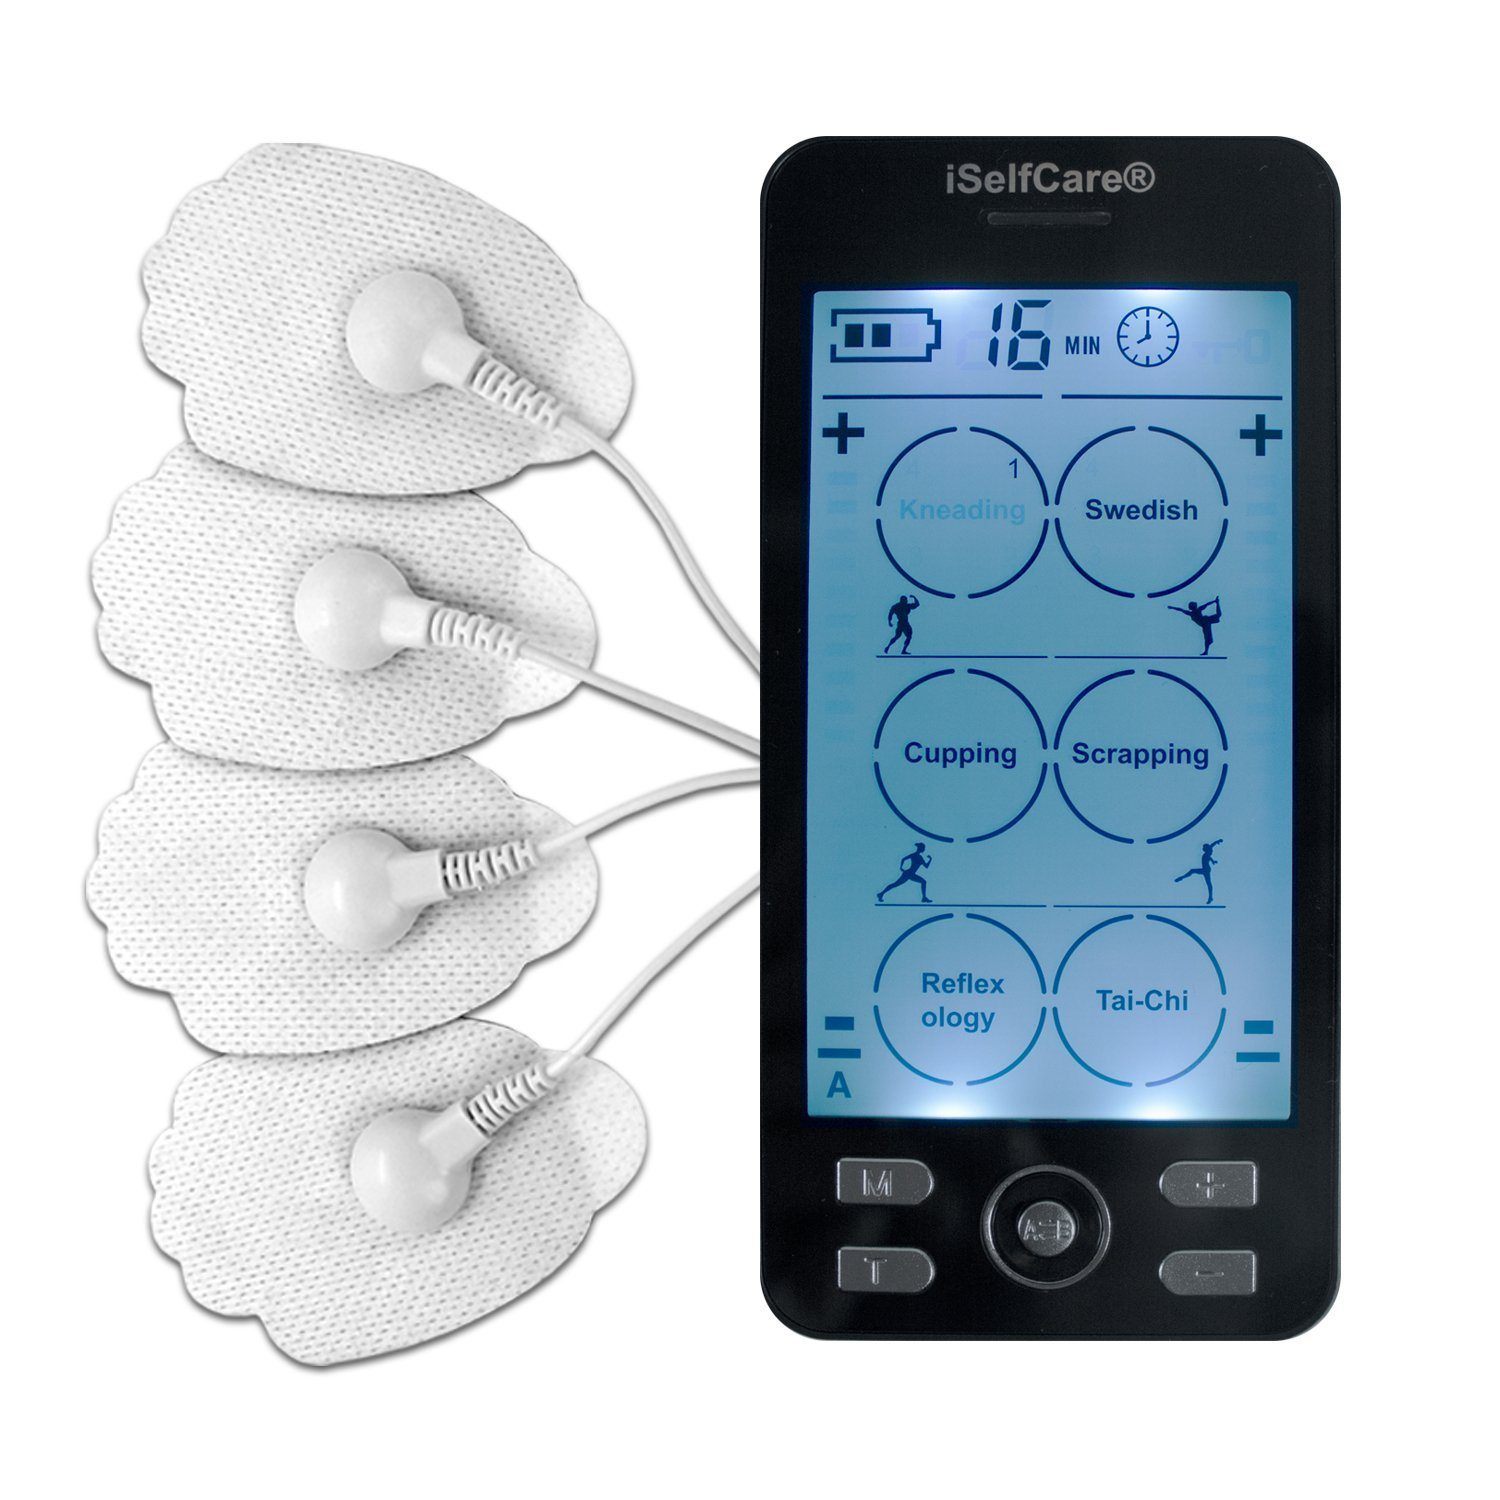 Can You Overuse a TENS Unit?, The Pain Relief Center